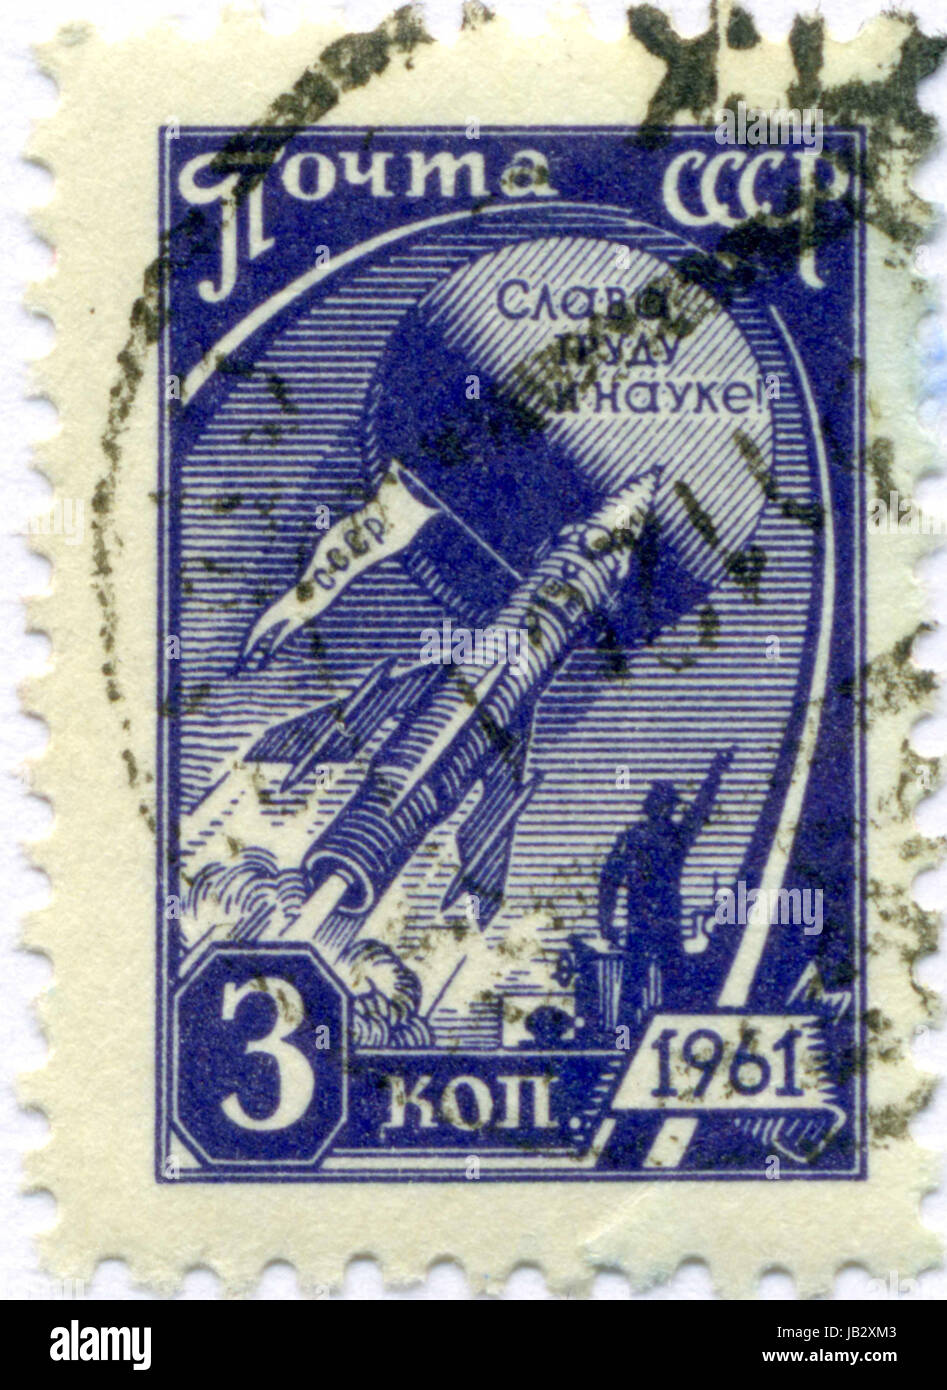 USSR - CIRCA 1961: A stamp printed in USSR shows the first human space flight, circa 1961 Stock Photo